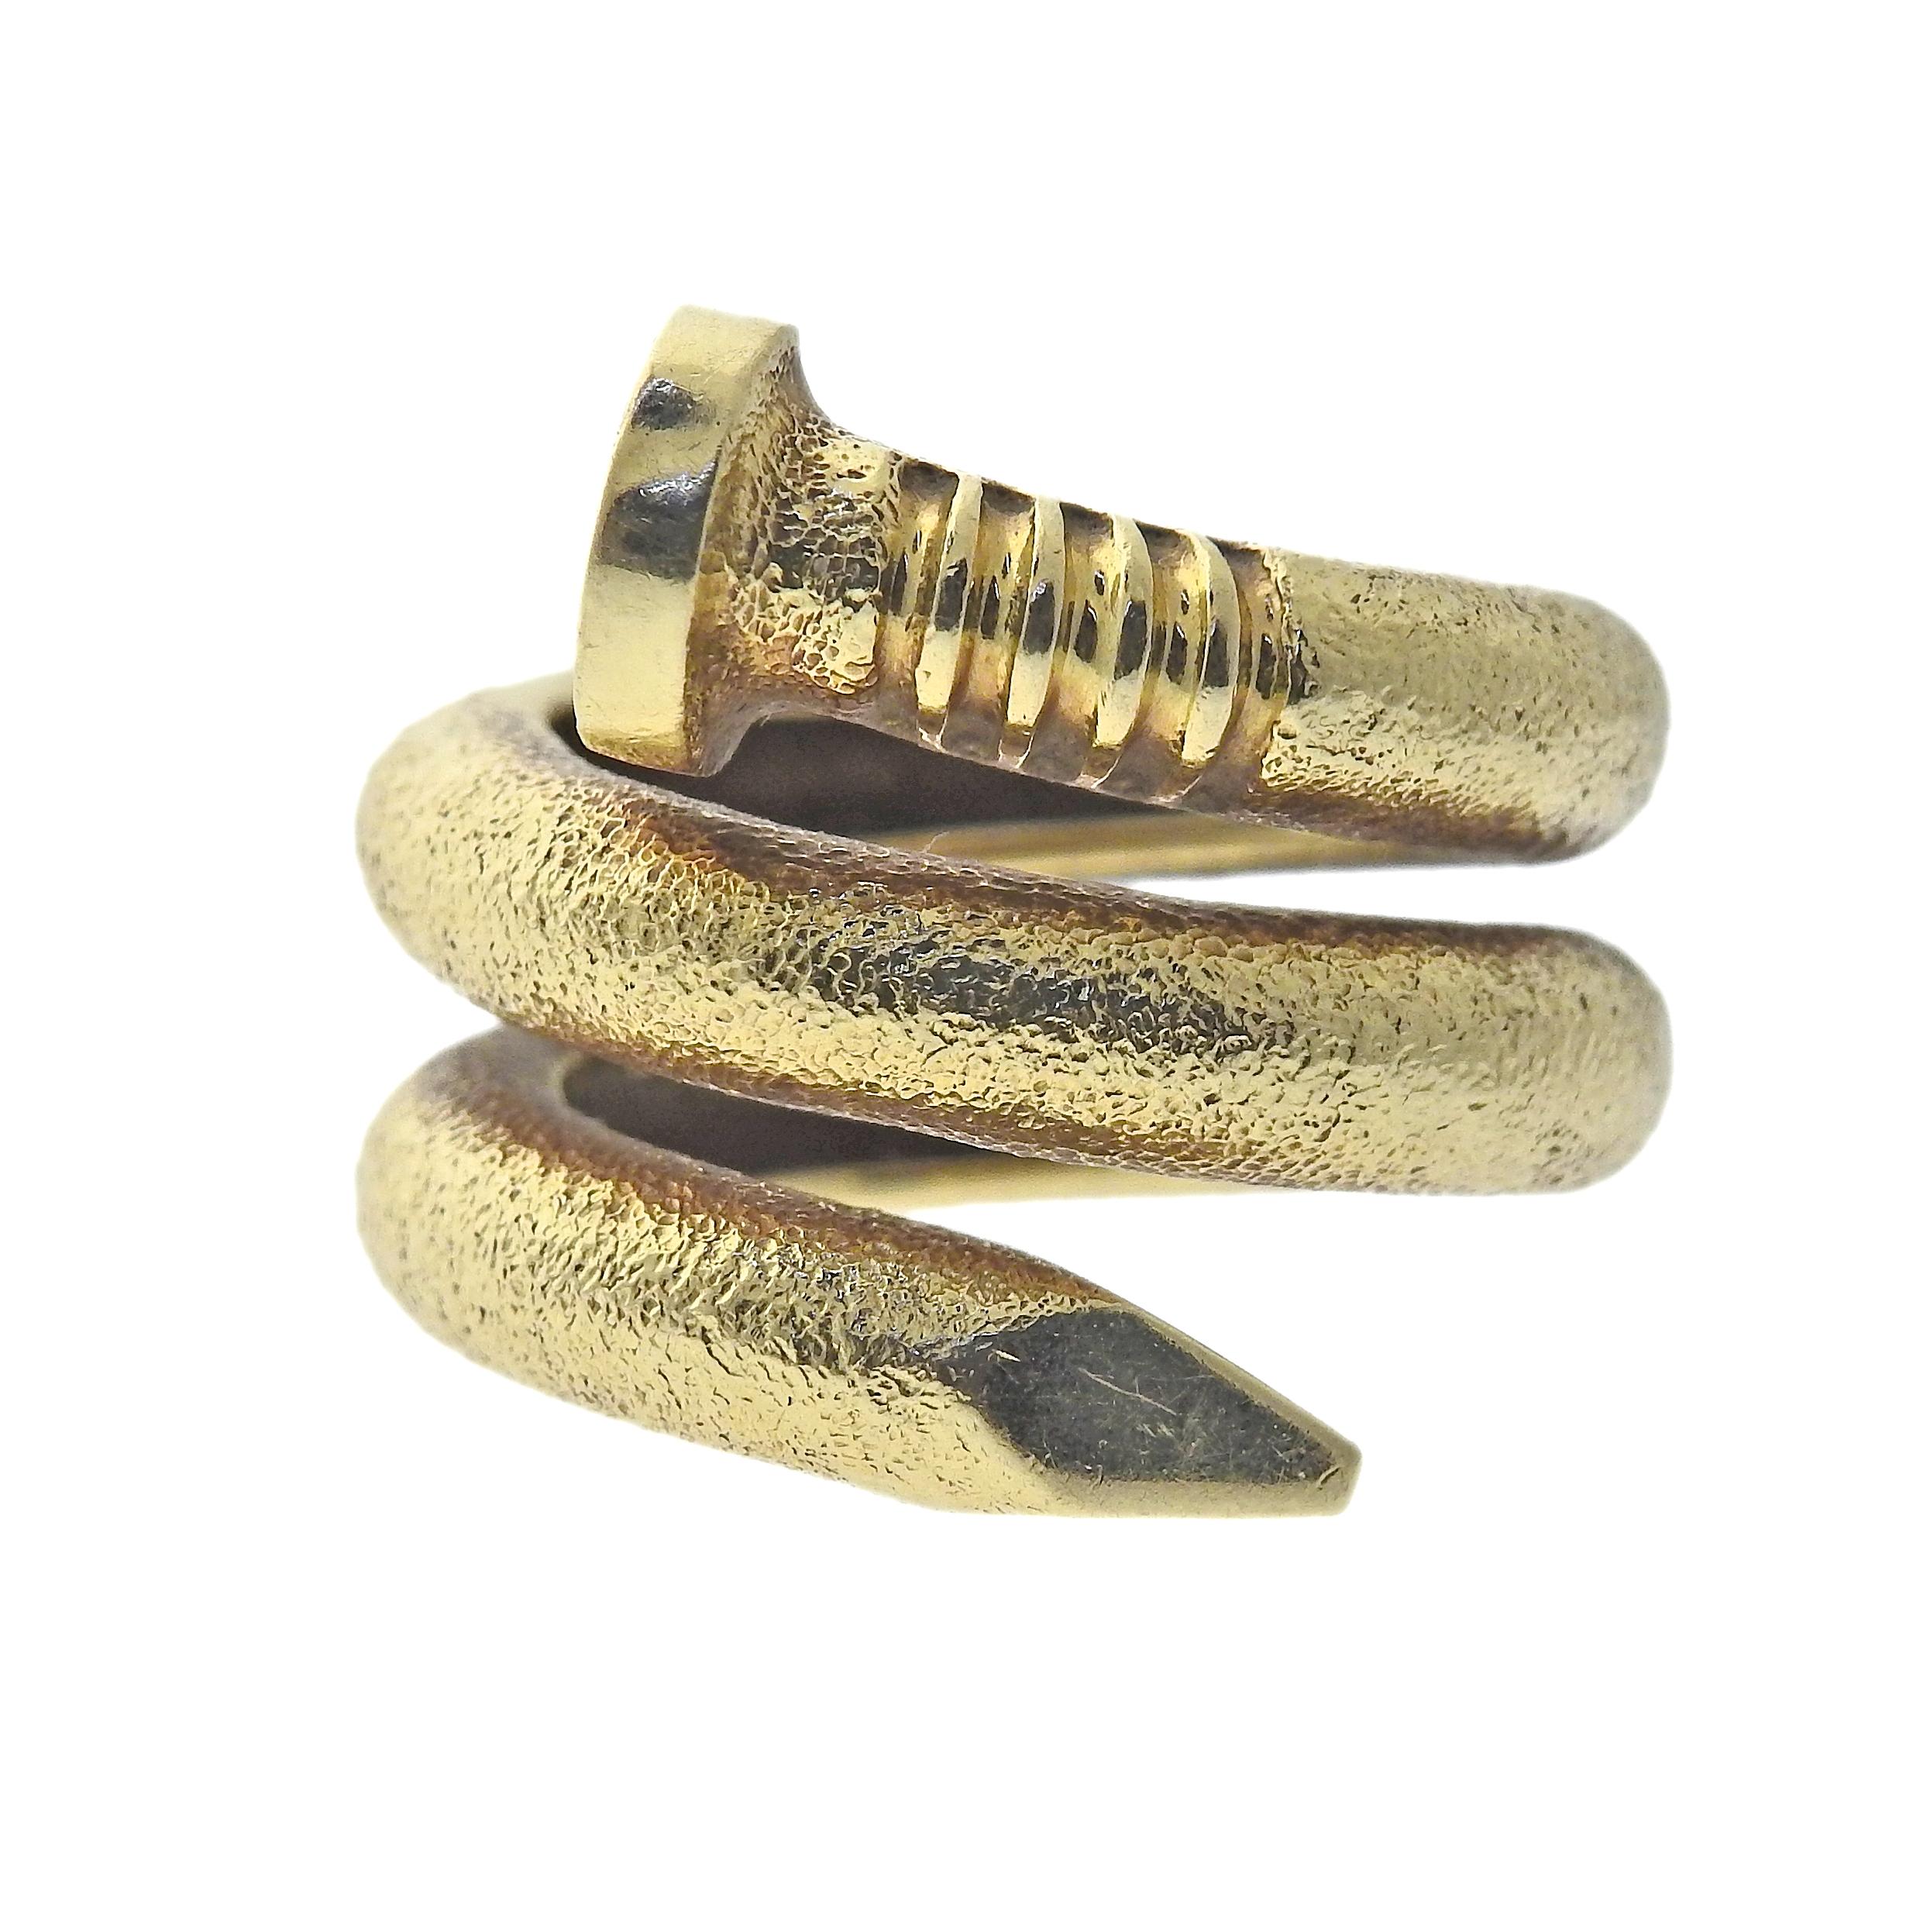 18k gold nail wrap ring by David Webb. Ring size 6.5, ring is 23mm wide. Weight - 16.2 grams. Marked: E267, David Webb 18k. 